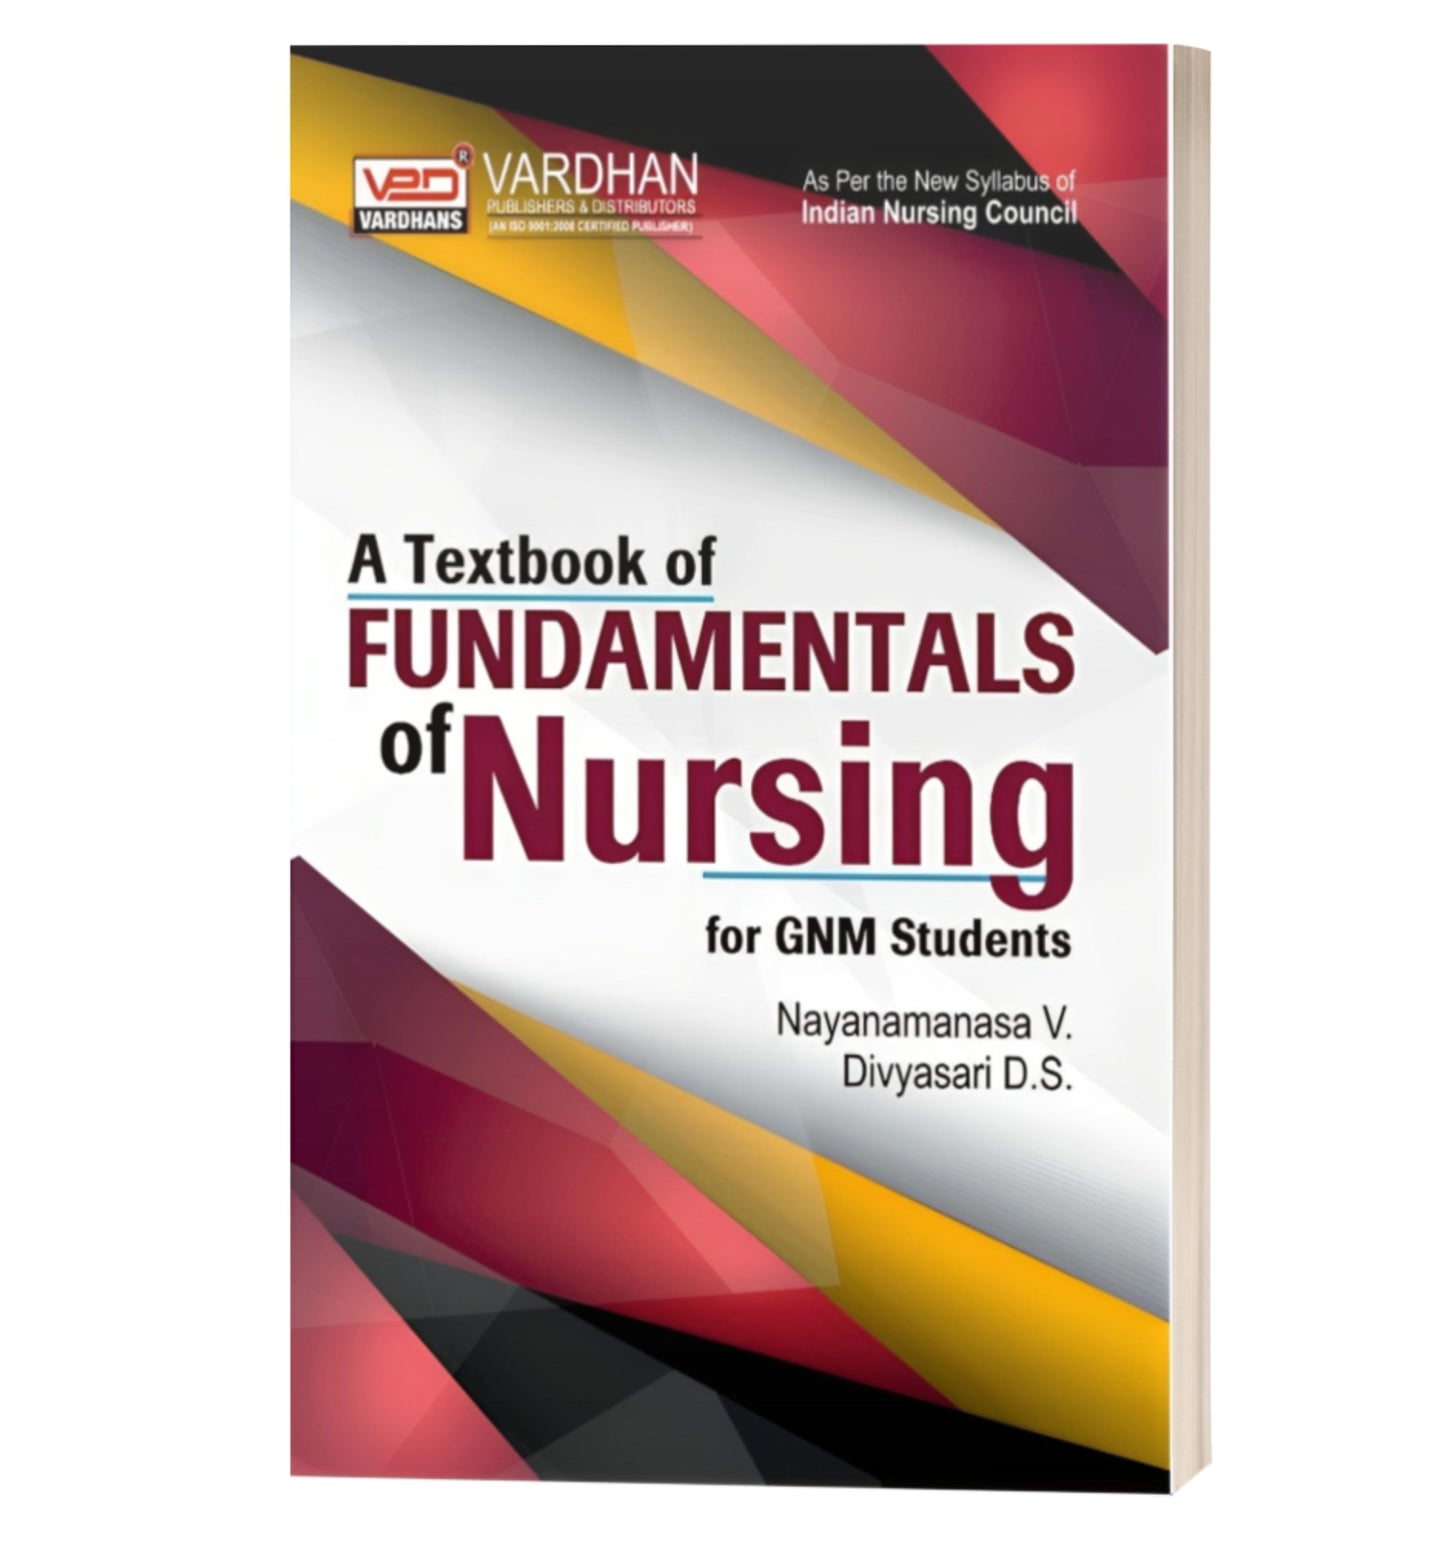 A Textbook of Fundamental of Nursing for GNM Students